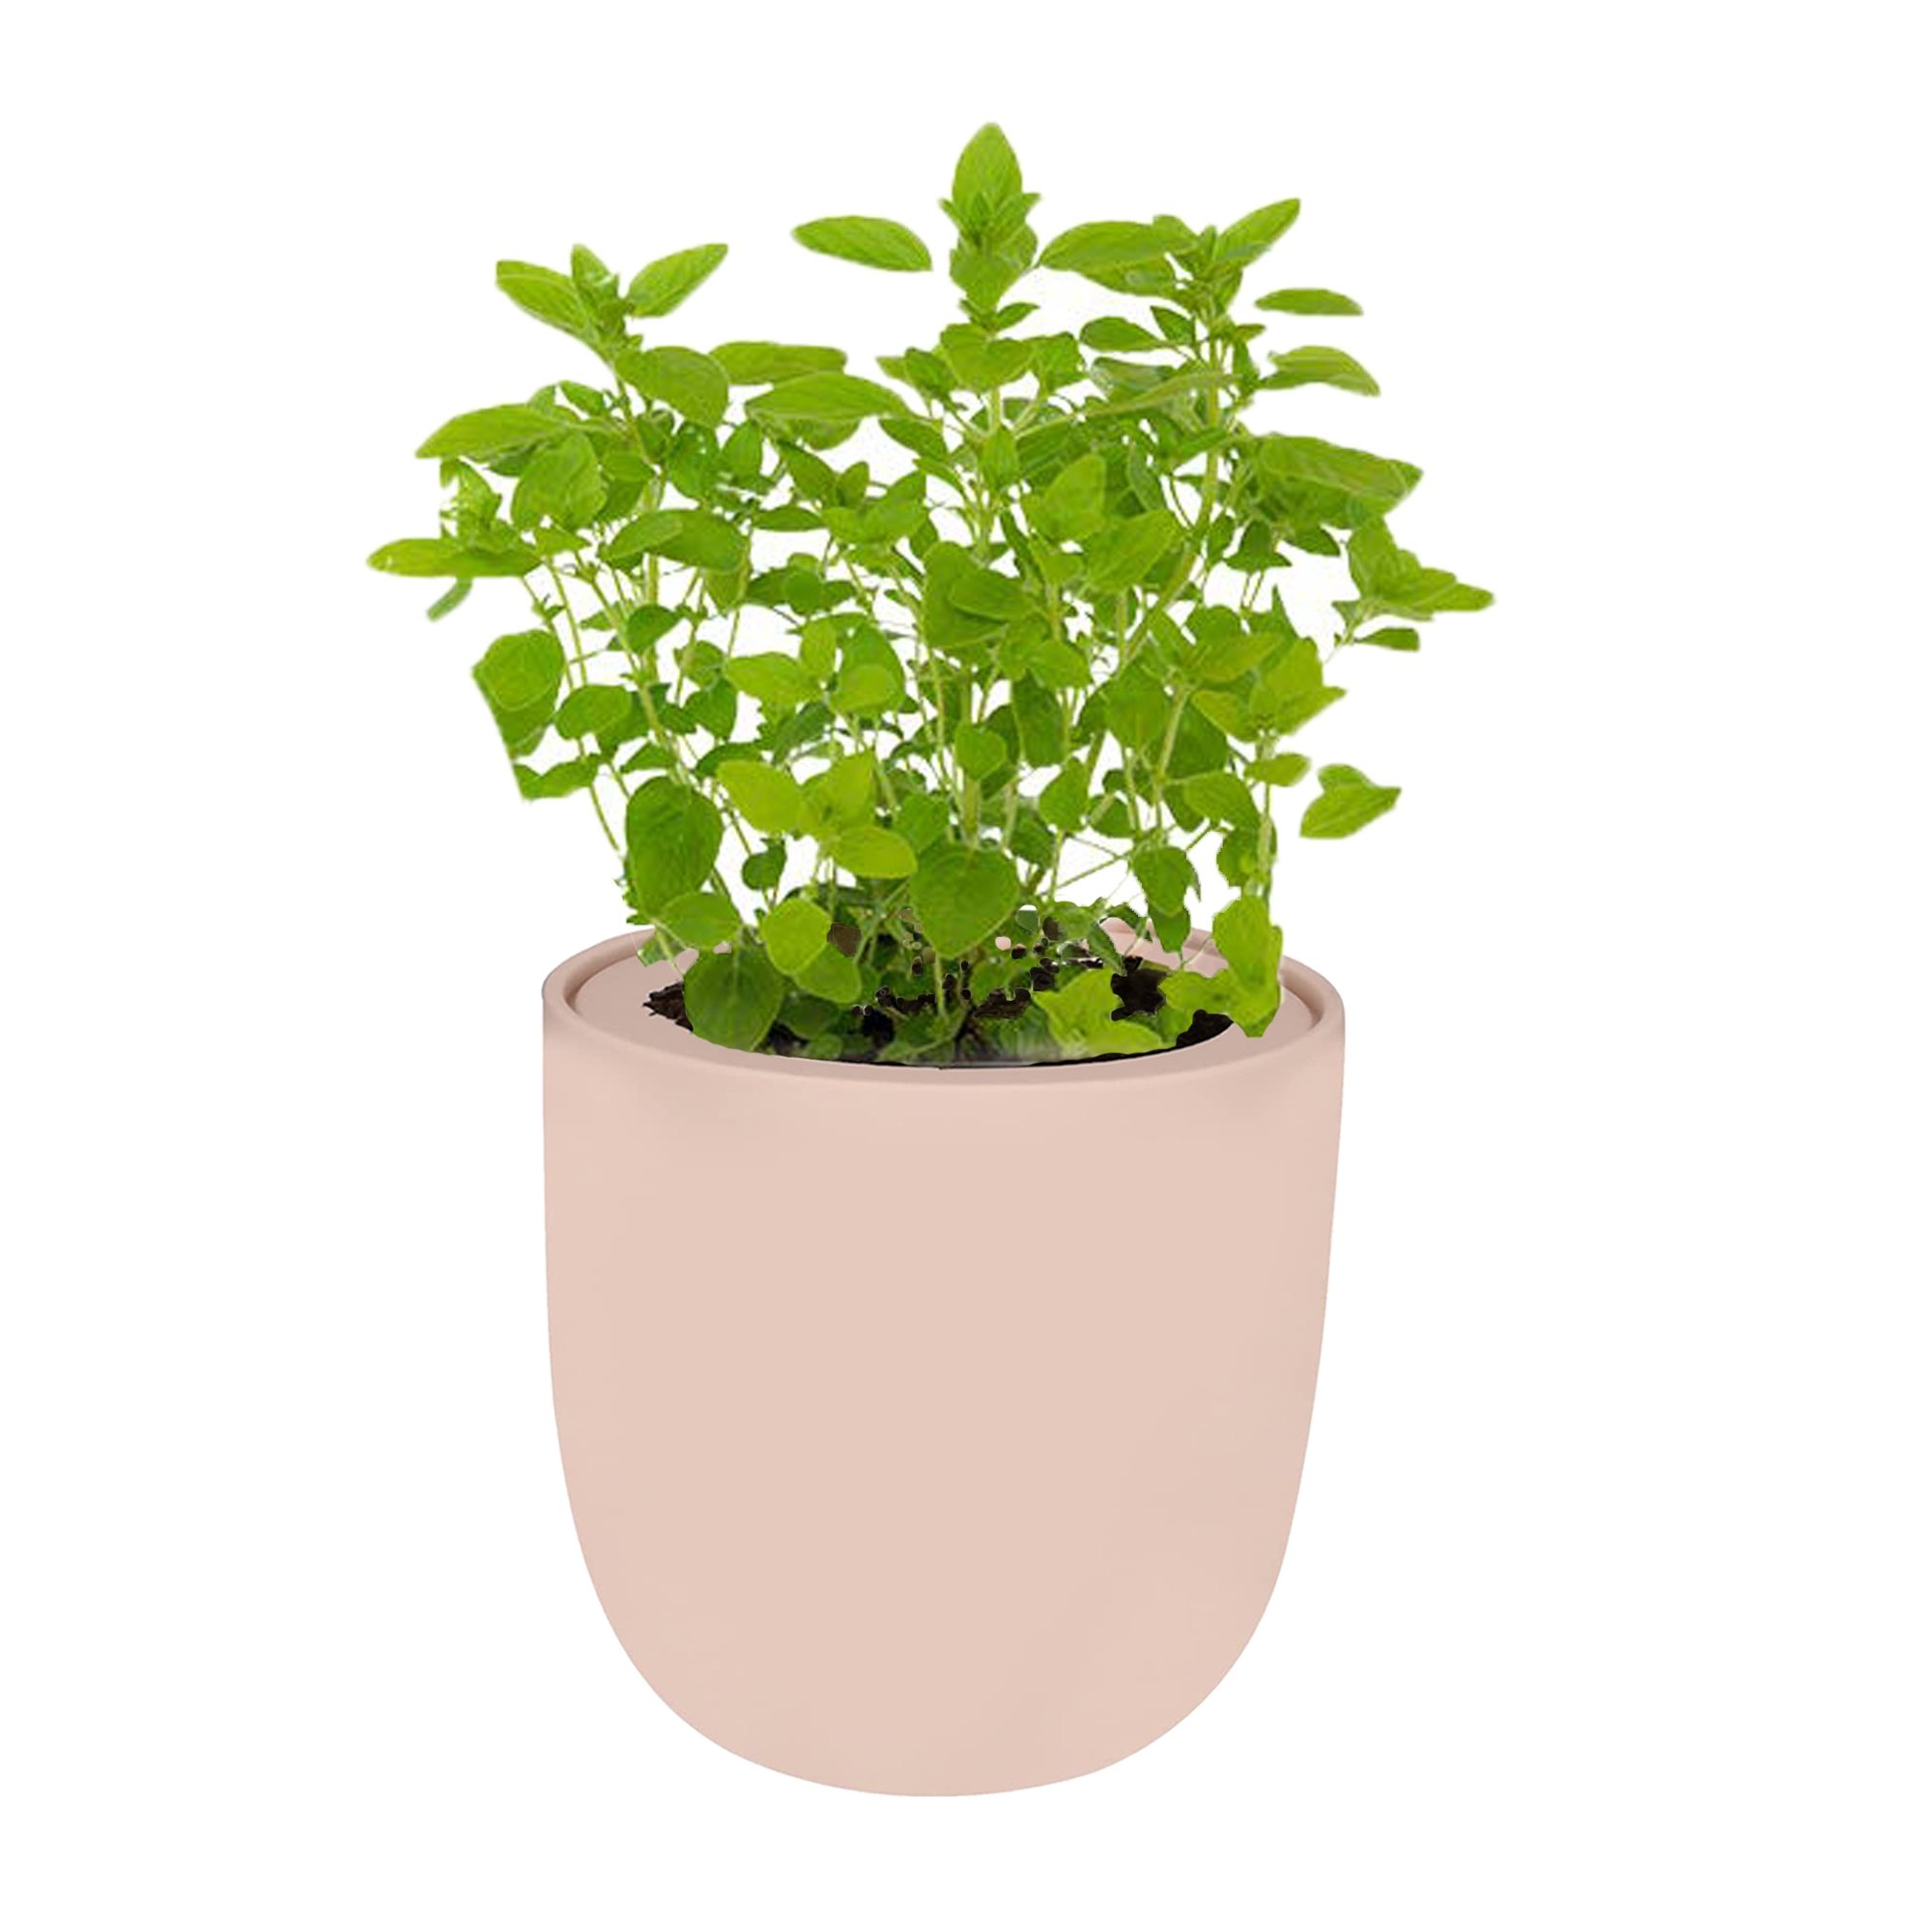 Marjoram Pink Ceramic Pot Hydroponic Growing Kit with Seeds